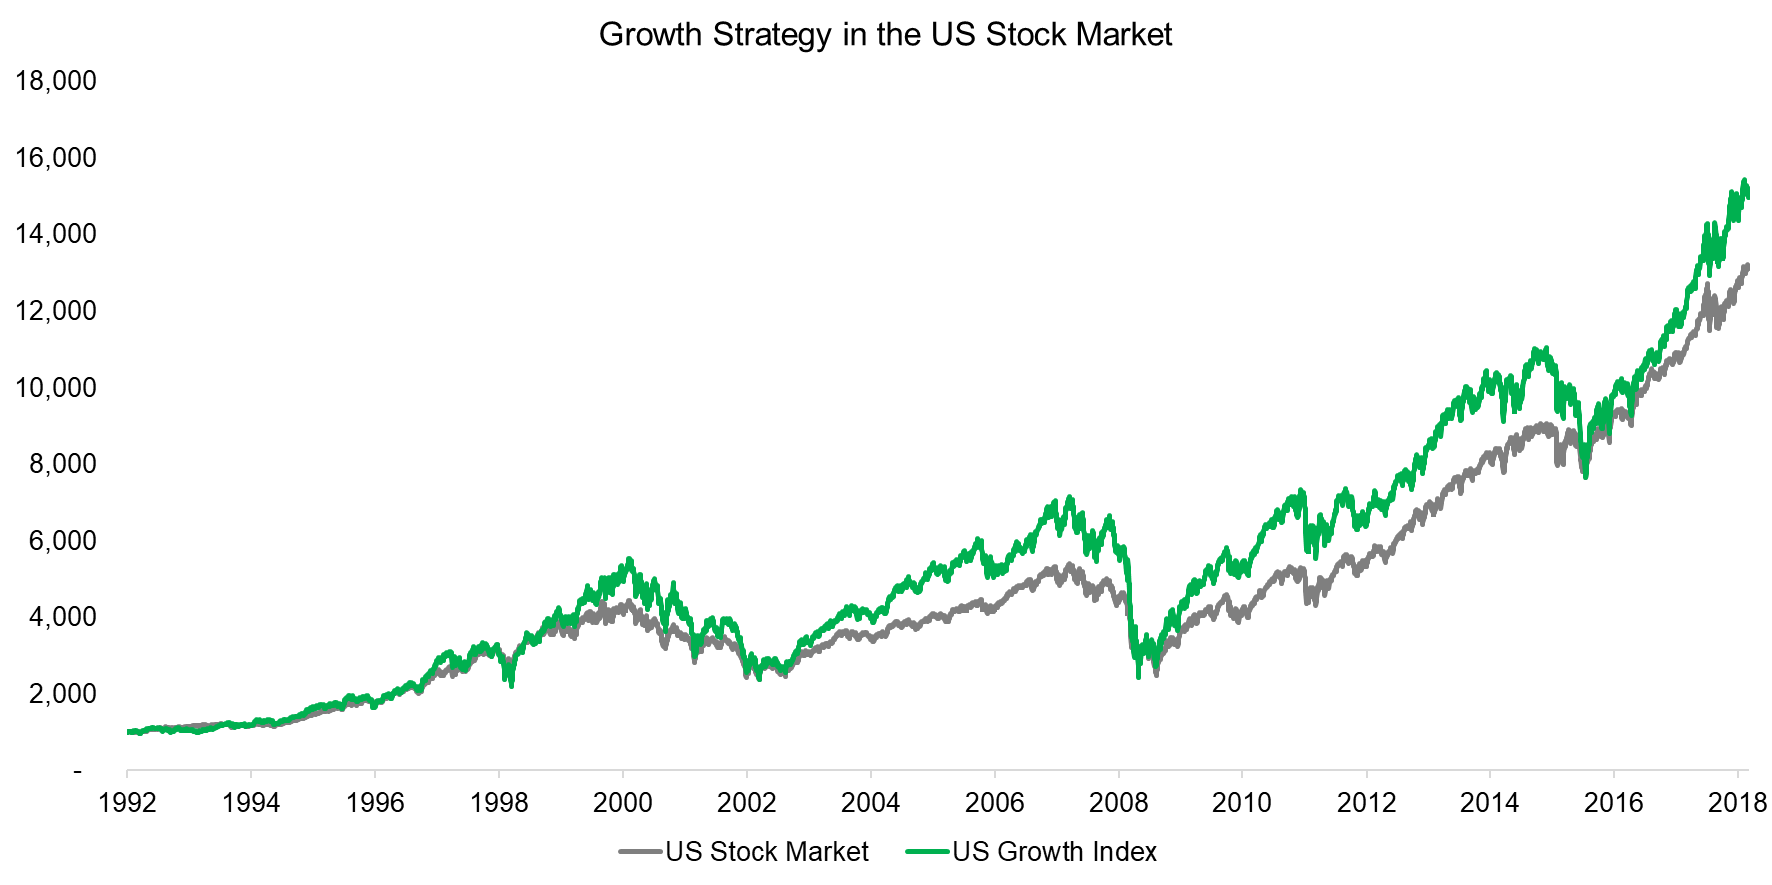 Growth Strategy in the US Stock Market